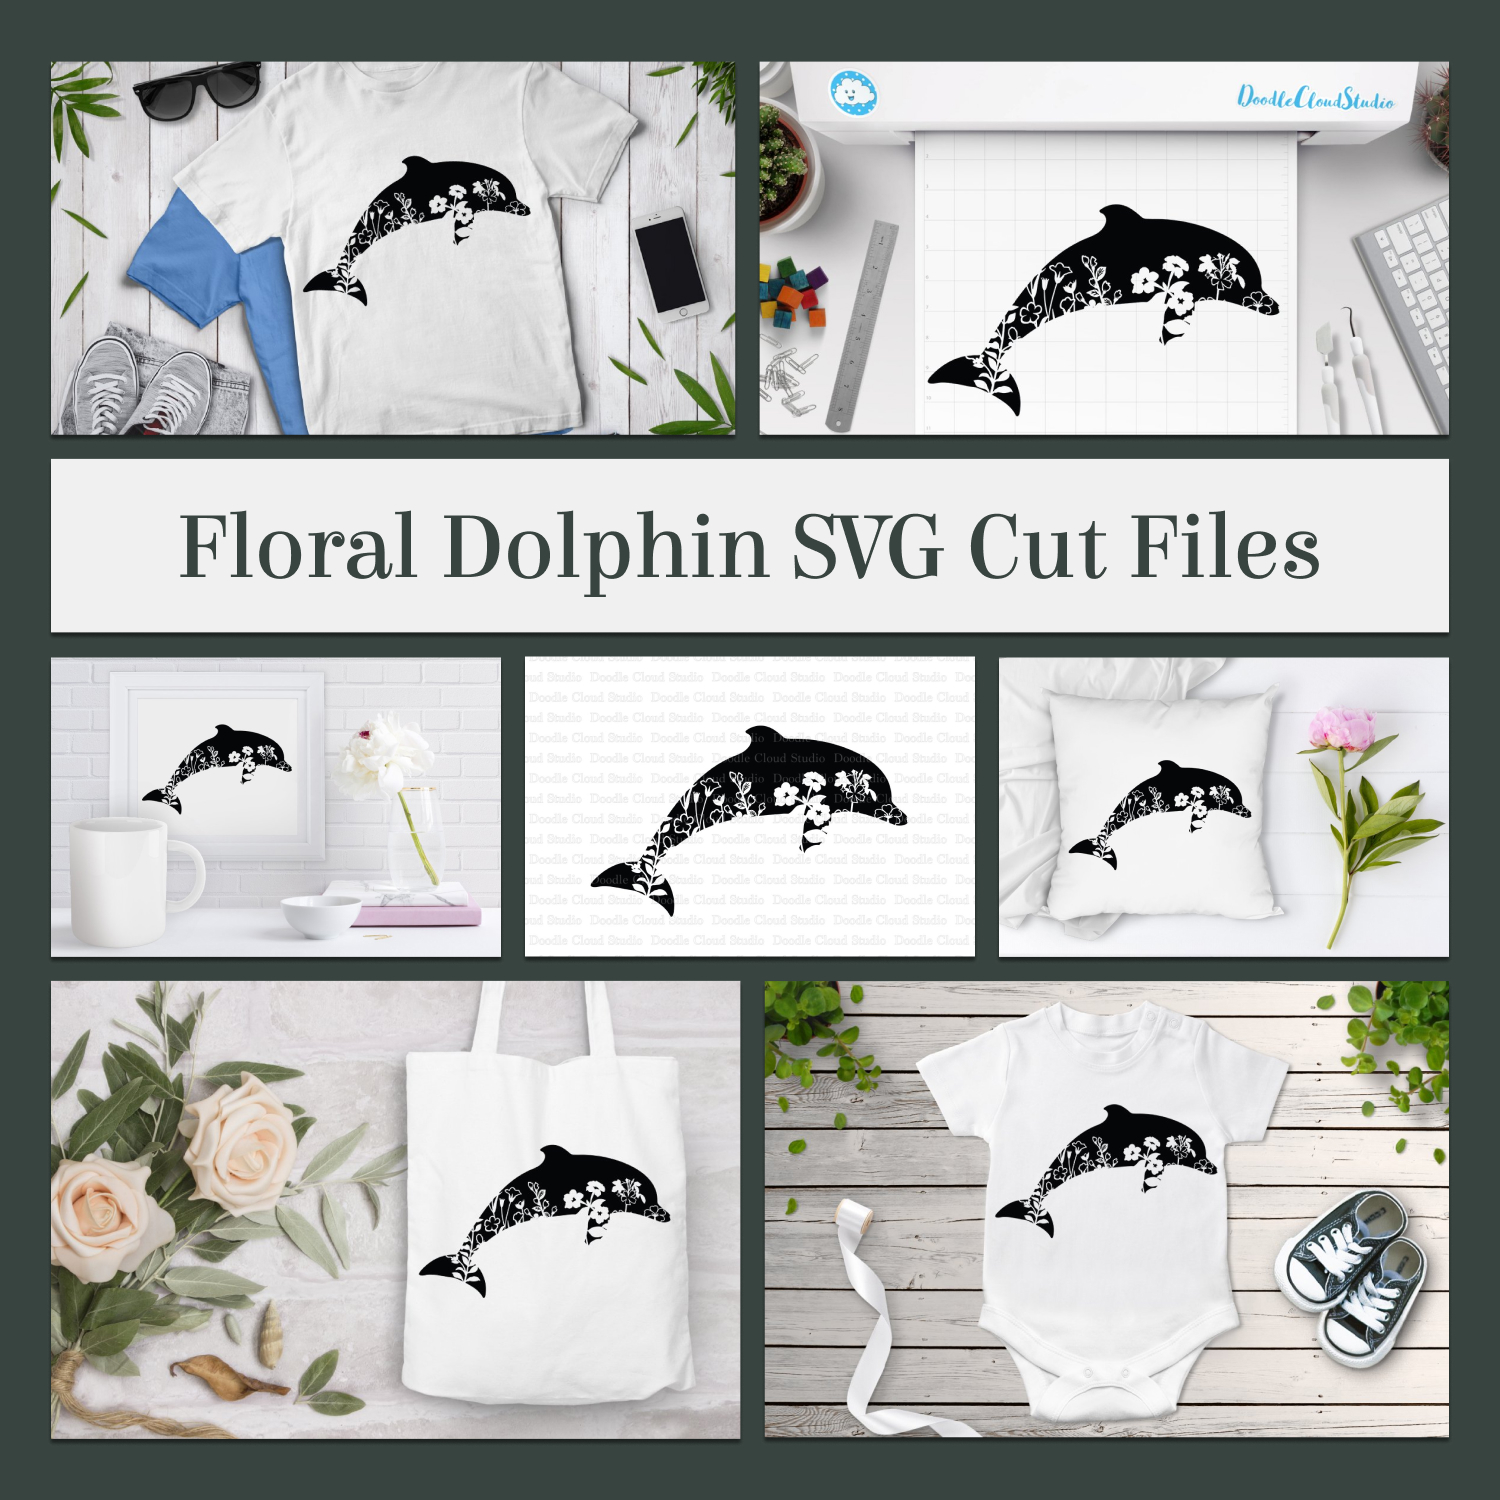 Collage of photos of a dolphin svg cut files.